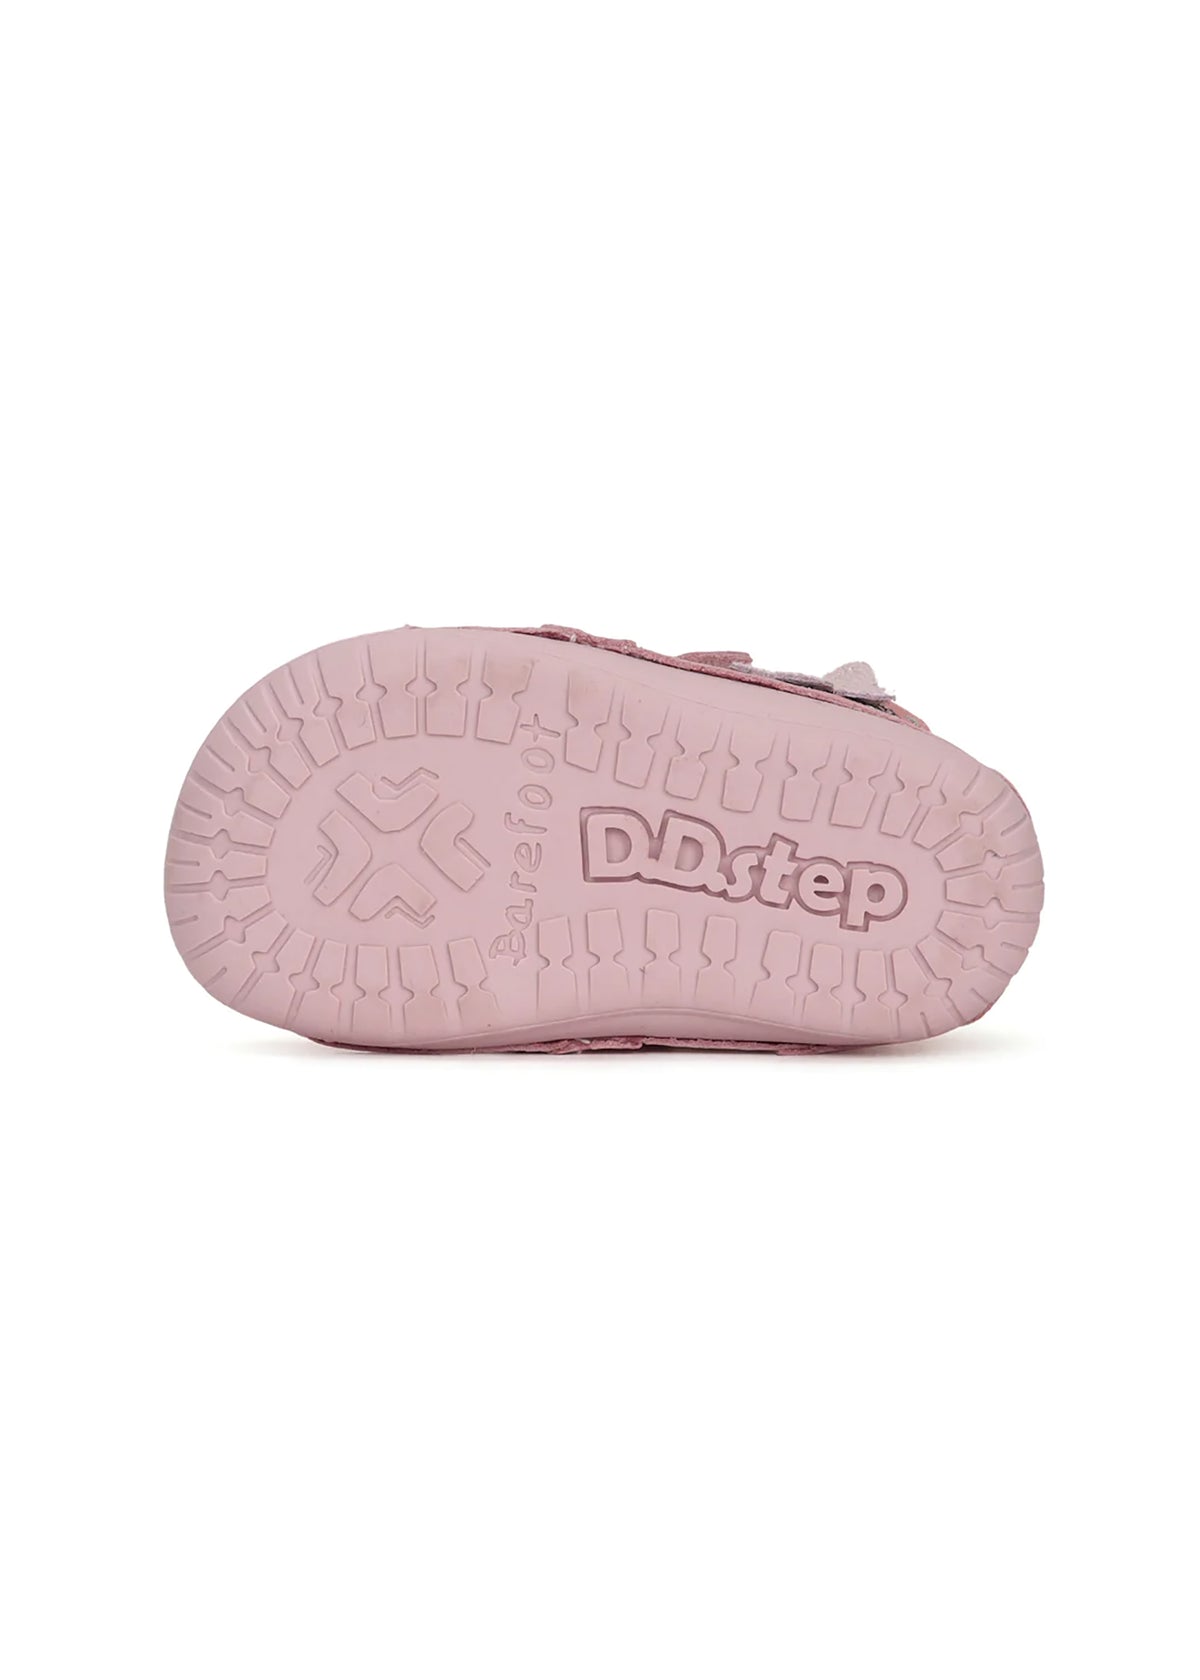 Children's first step shoes - pink leather, butterfly